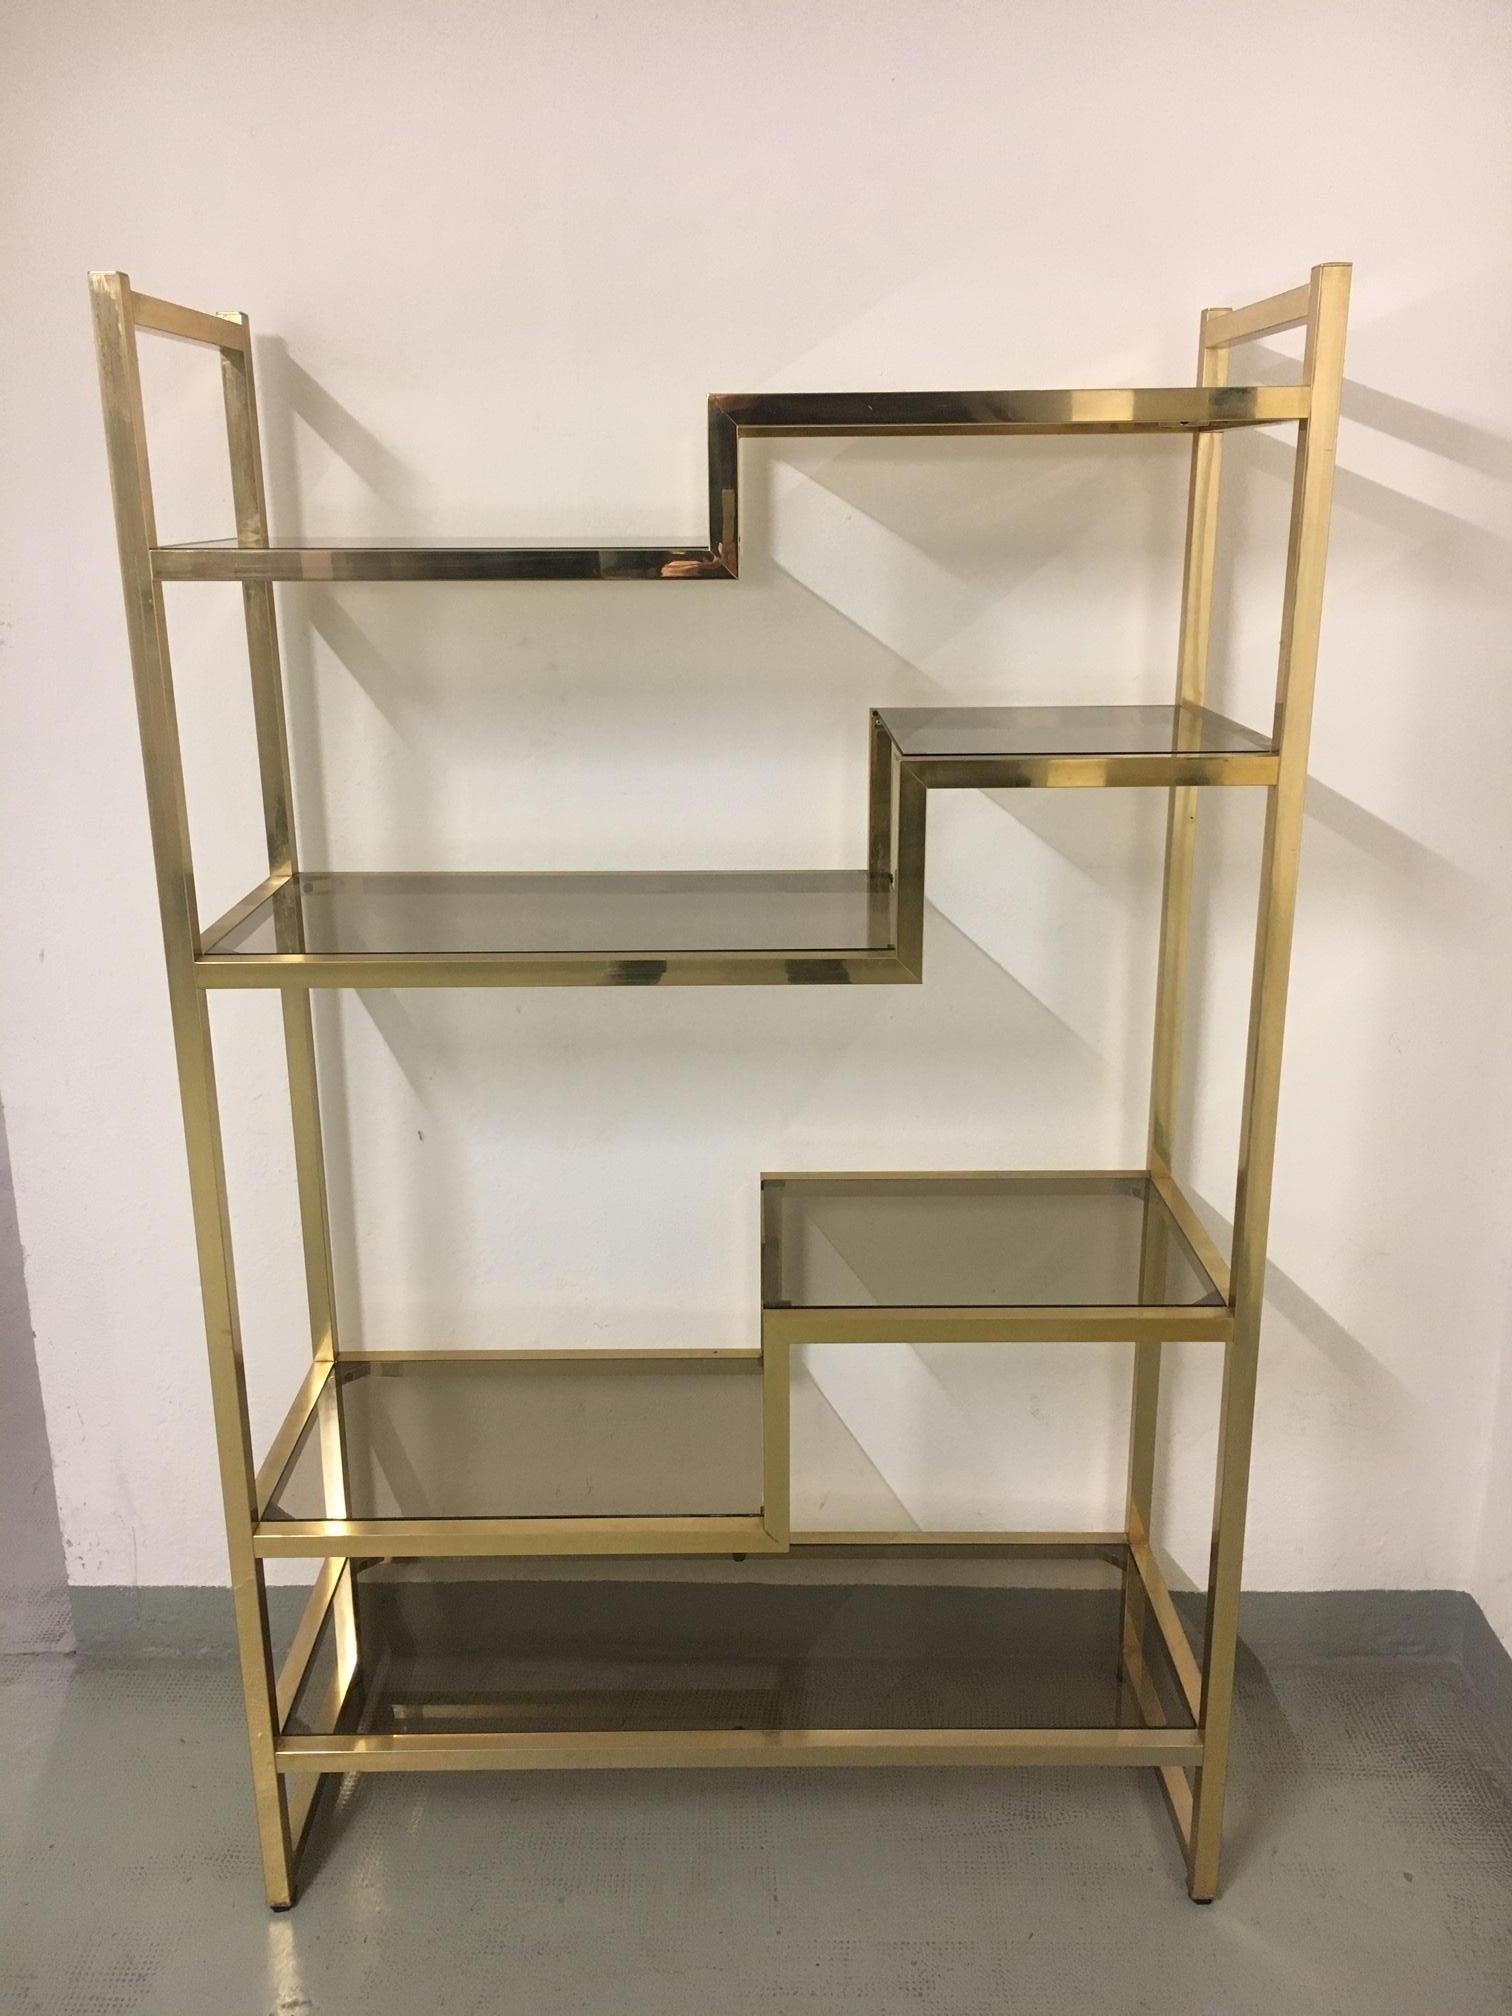 Vintage brass and smoked glass shelving / étagère in the style of Romeo Rega and Willy Rizzo shelves from the same period, made in Italy ca. 1970s.
Very good condition, highly decorative.
 